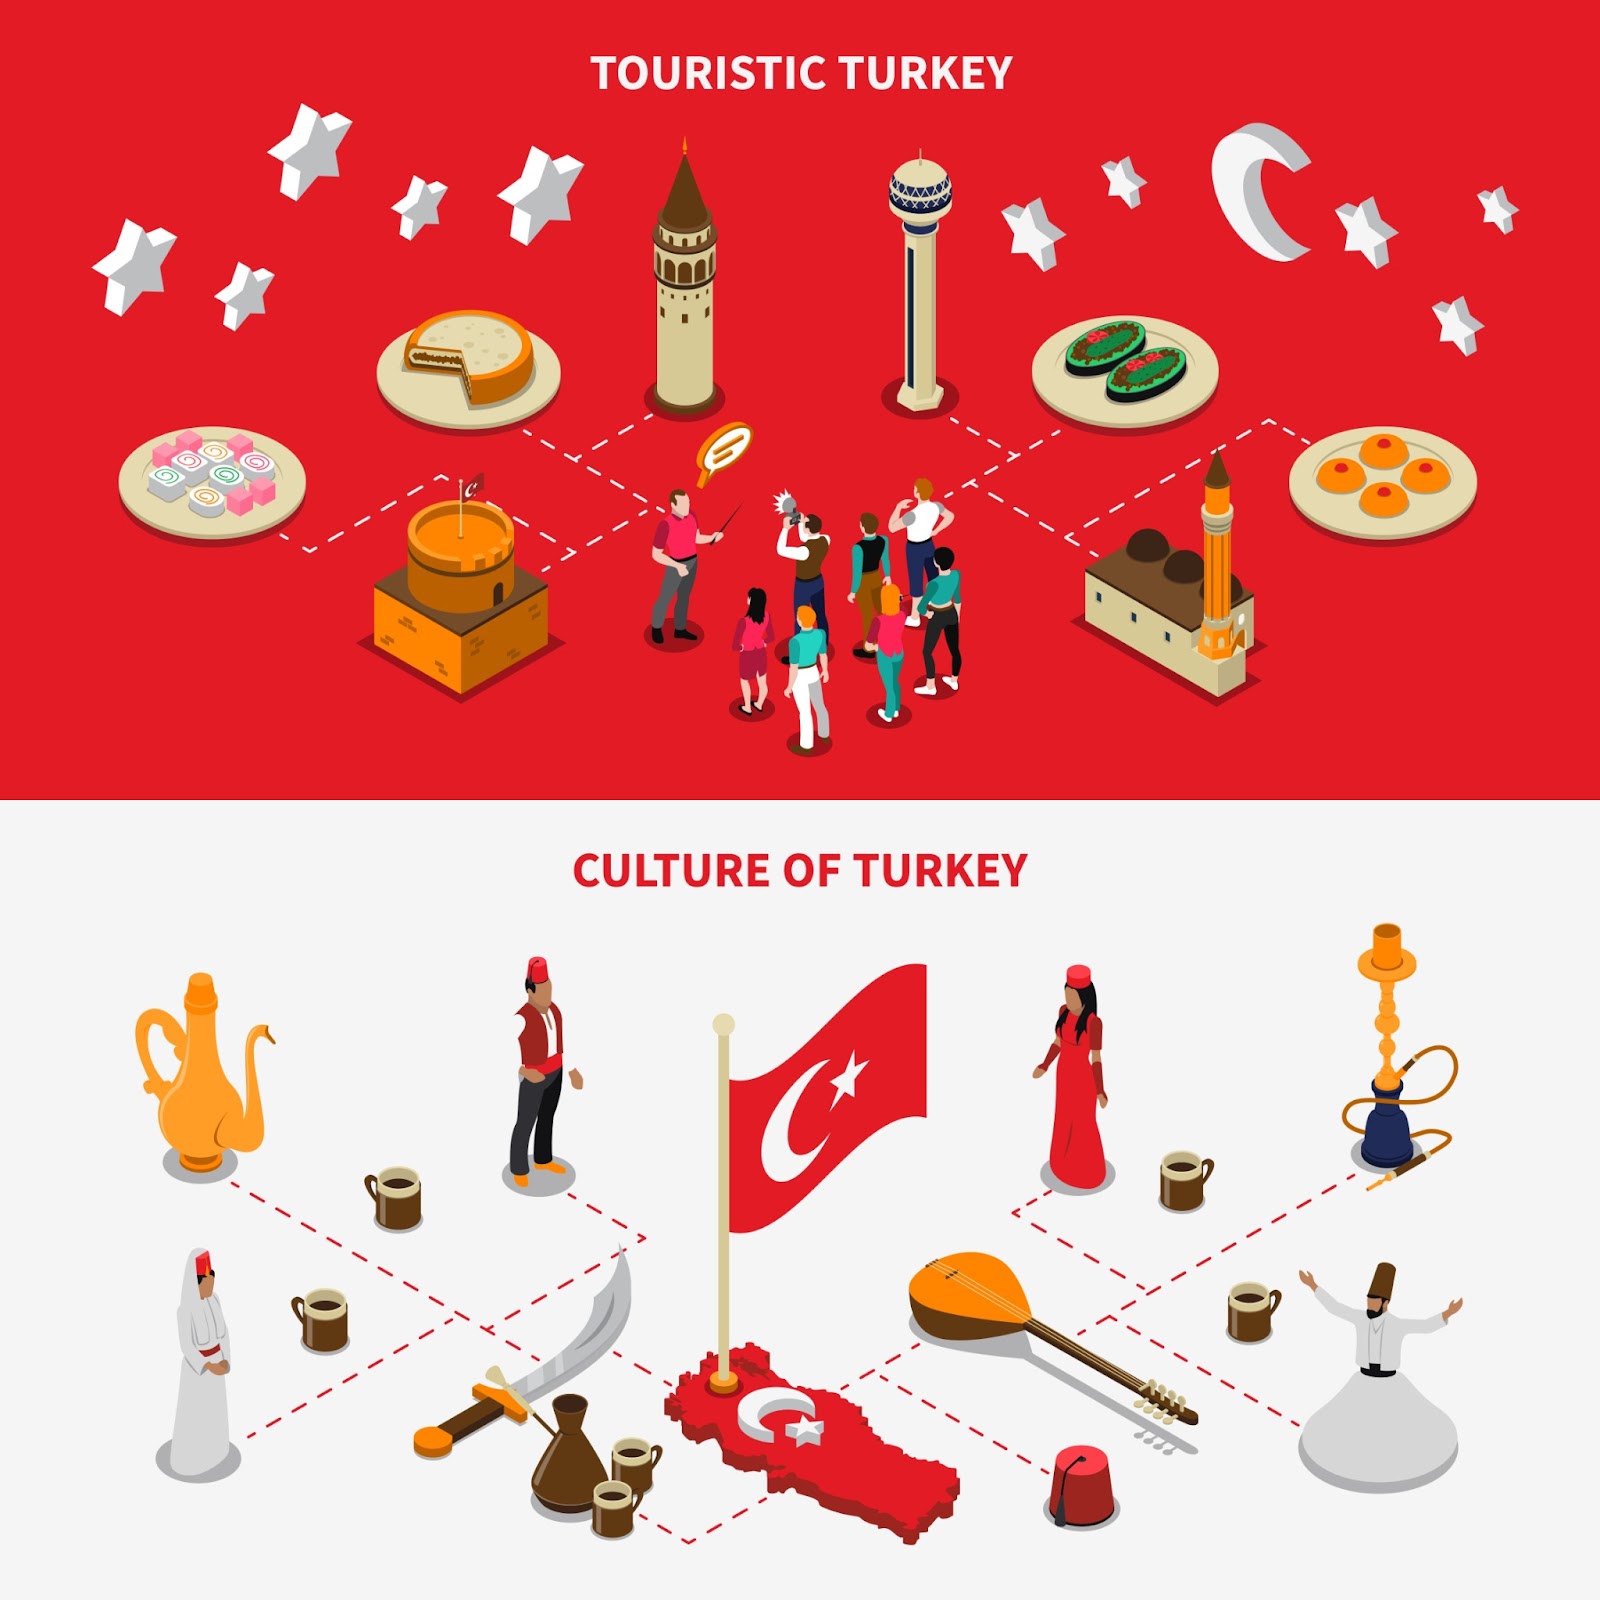 Are there any cultural or legal aspects to be aware of while in Turkey